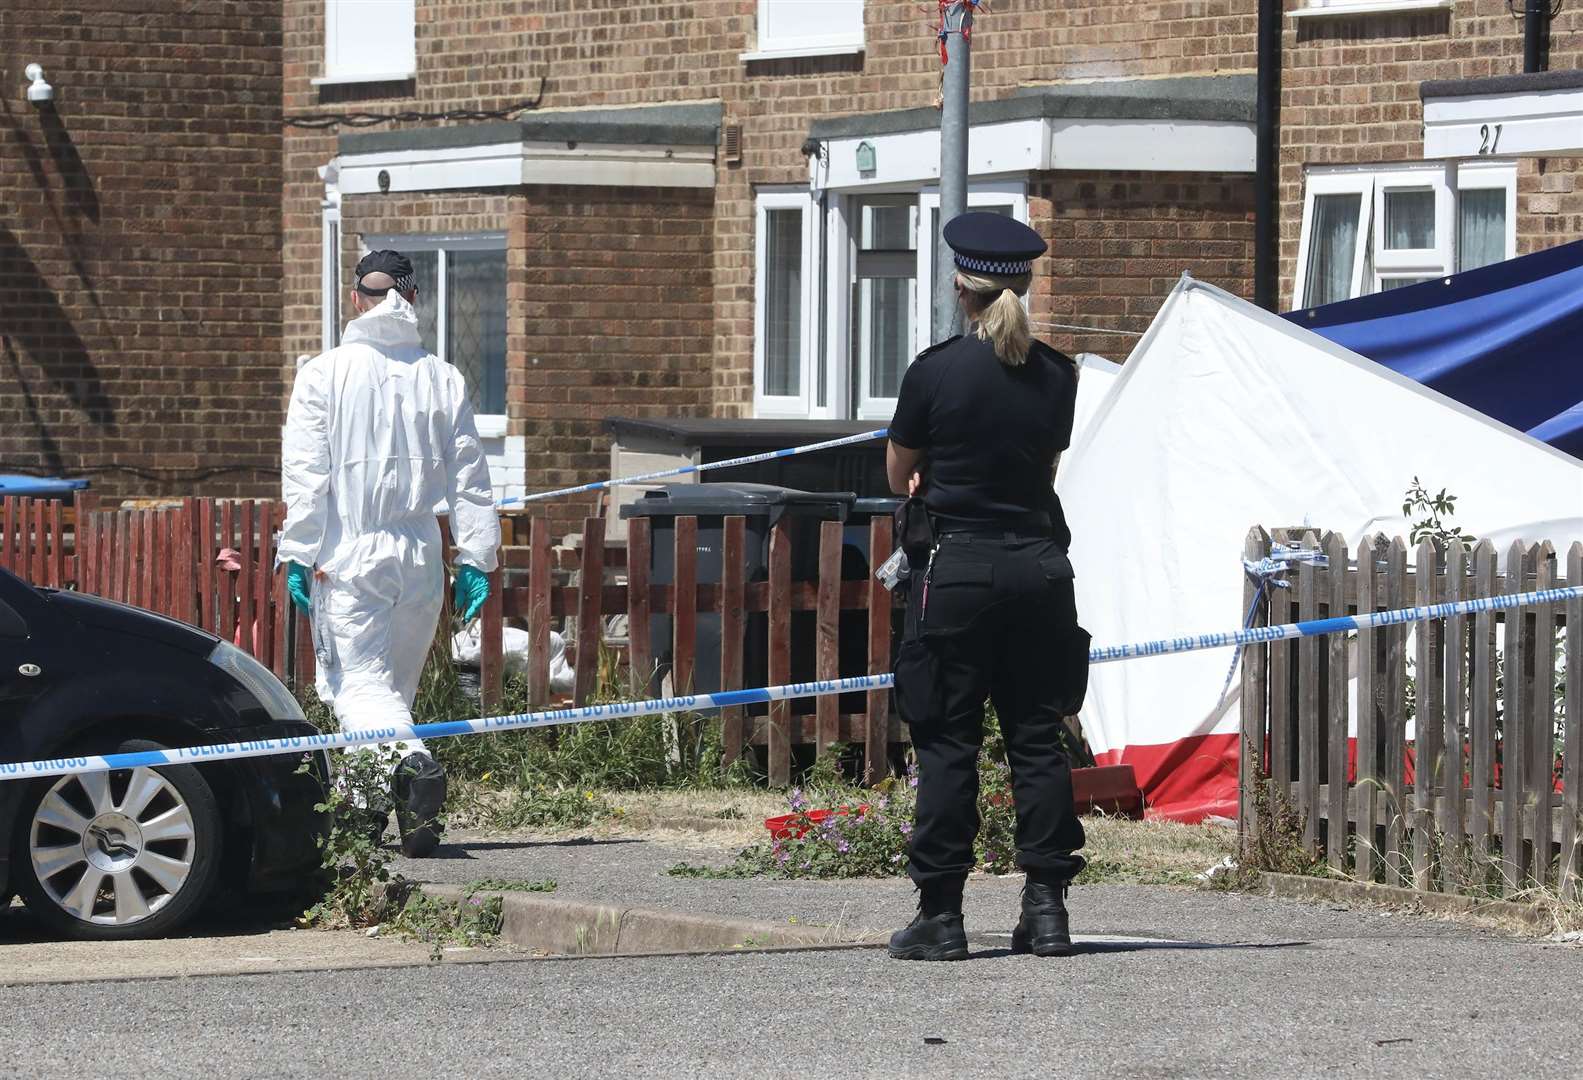 Police and forensics at the scene after Samantha Murphy's death. Picture: UKNIP